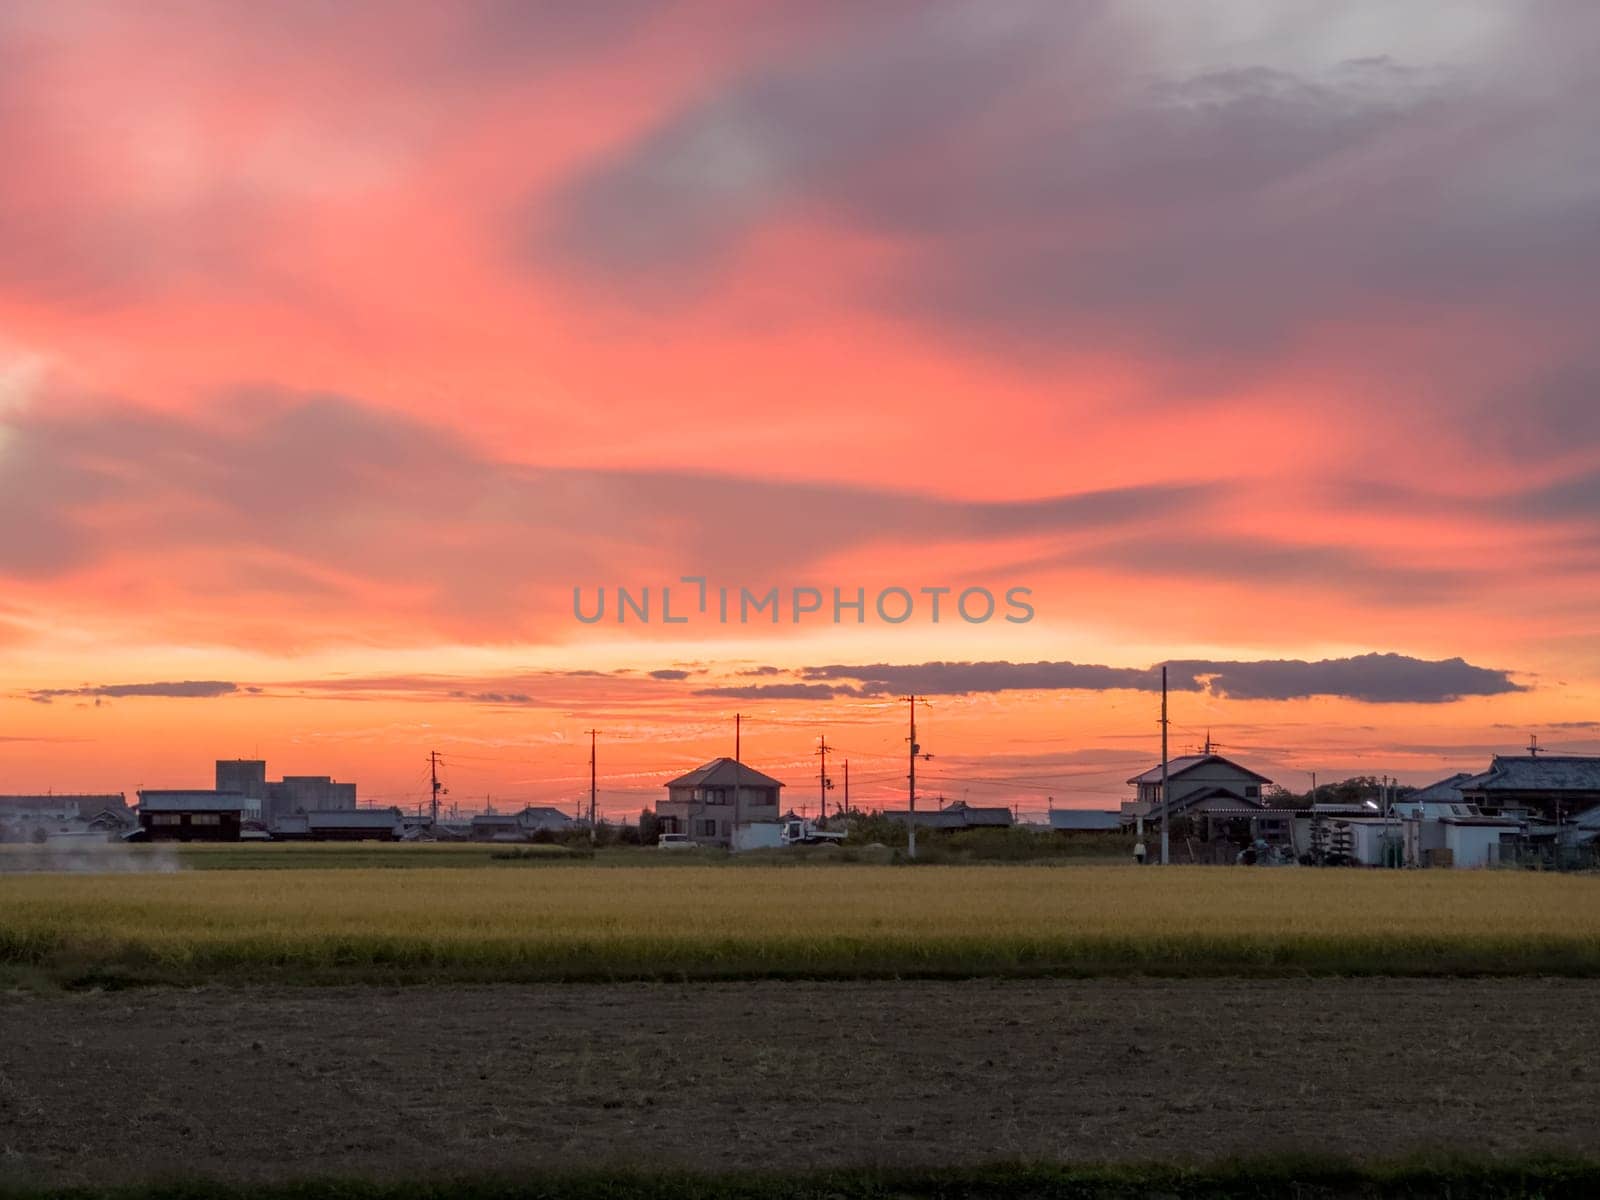 Houses by rice field in rural Japan under dramatic sunset color in sky by Osaze